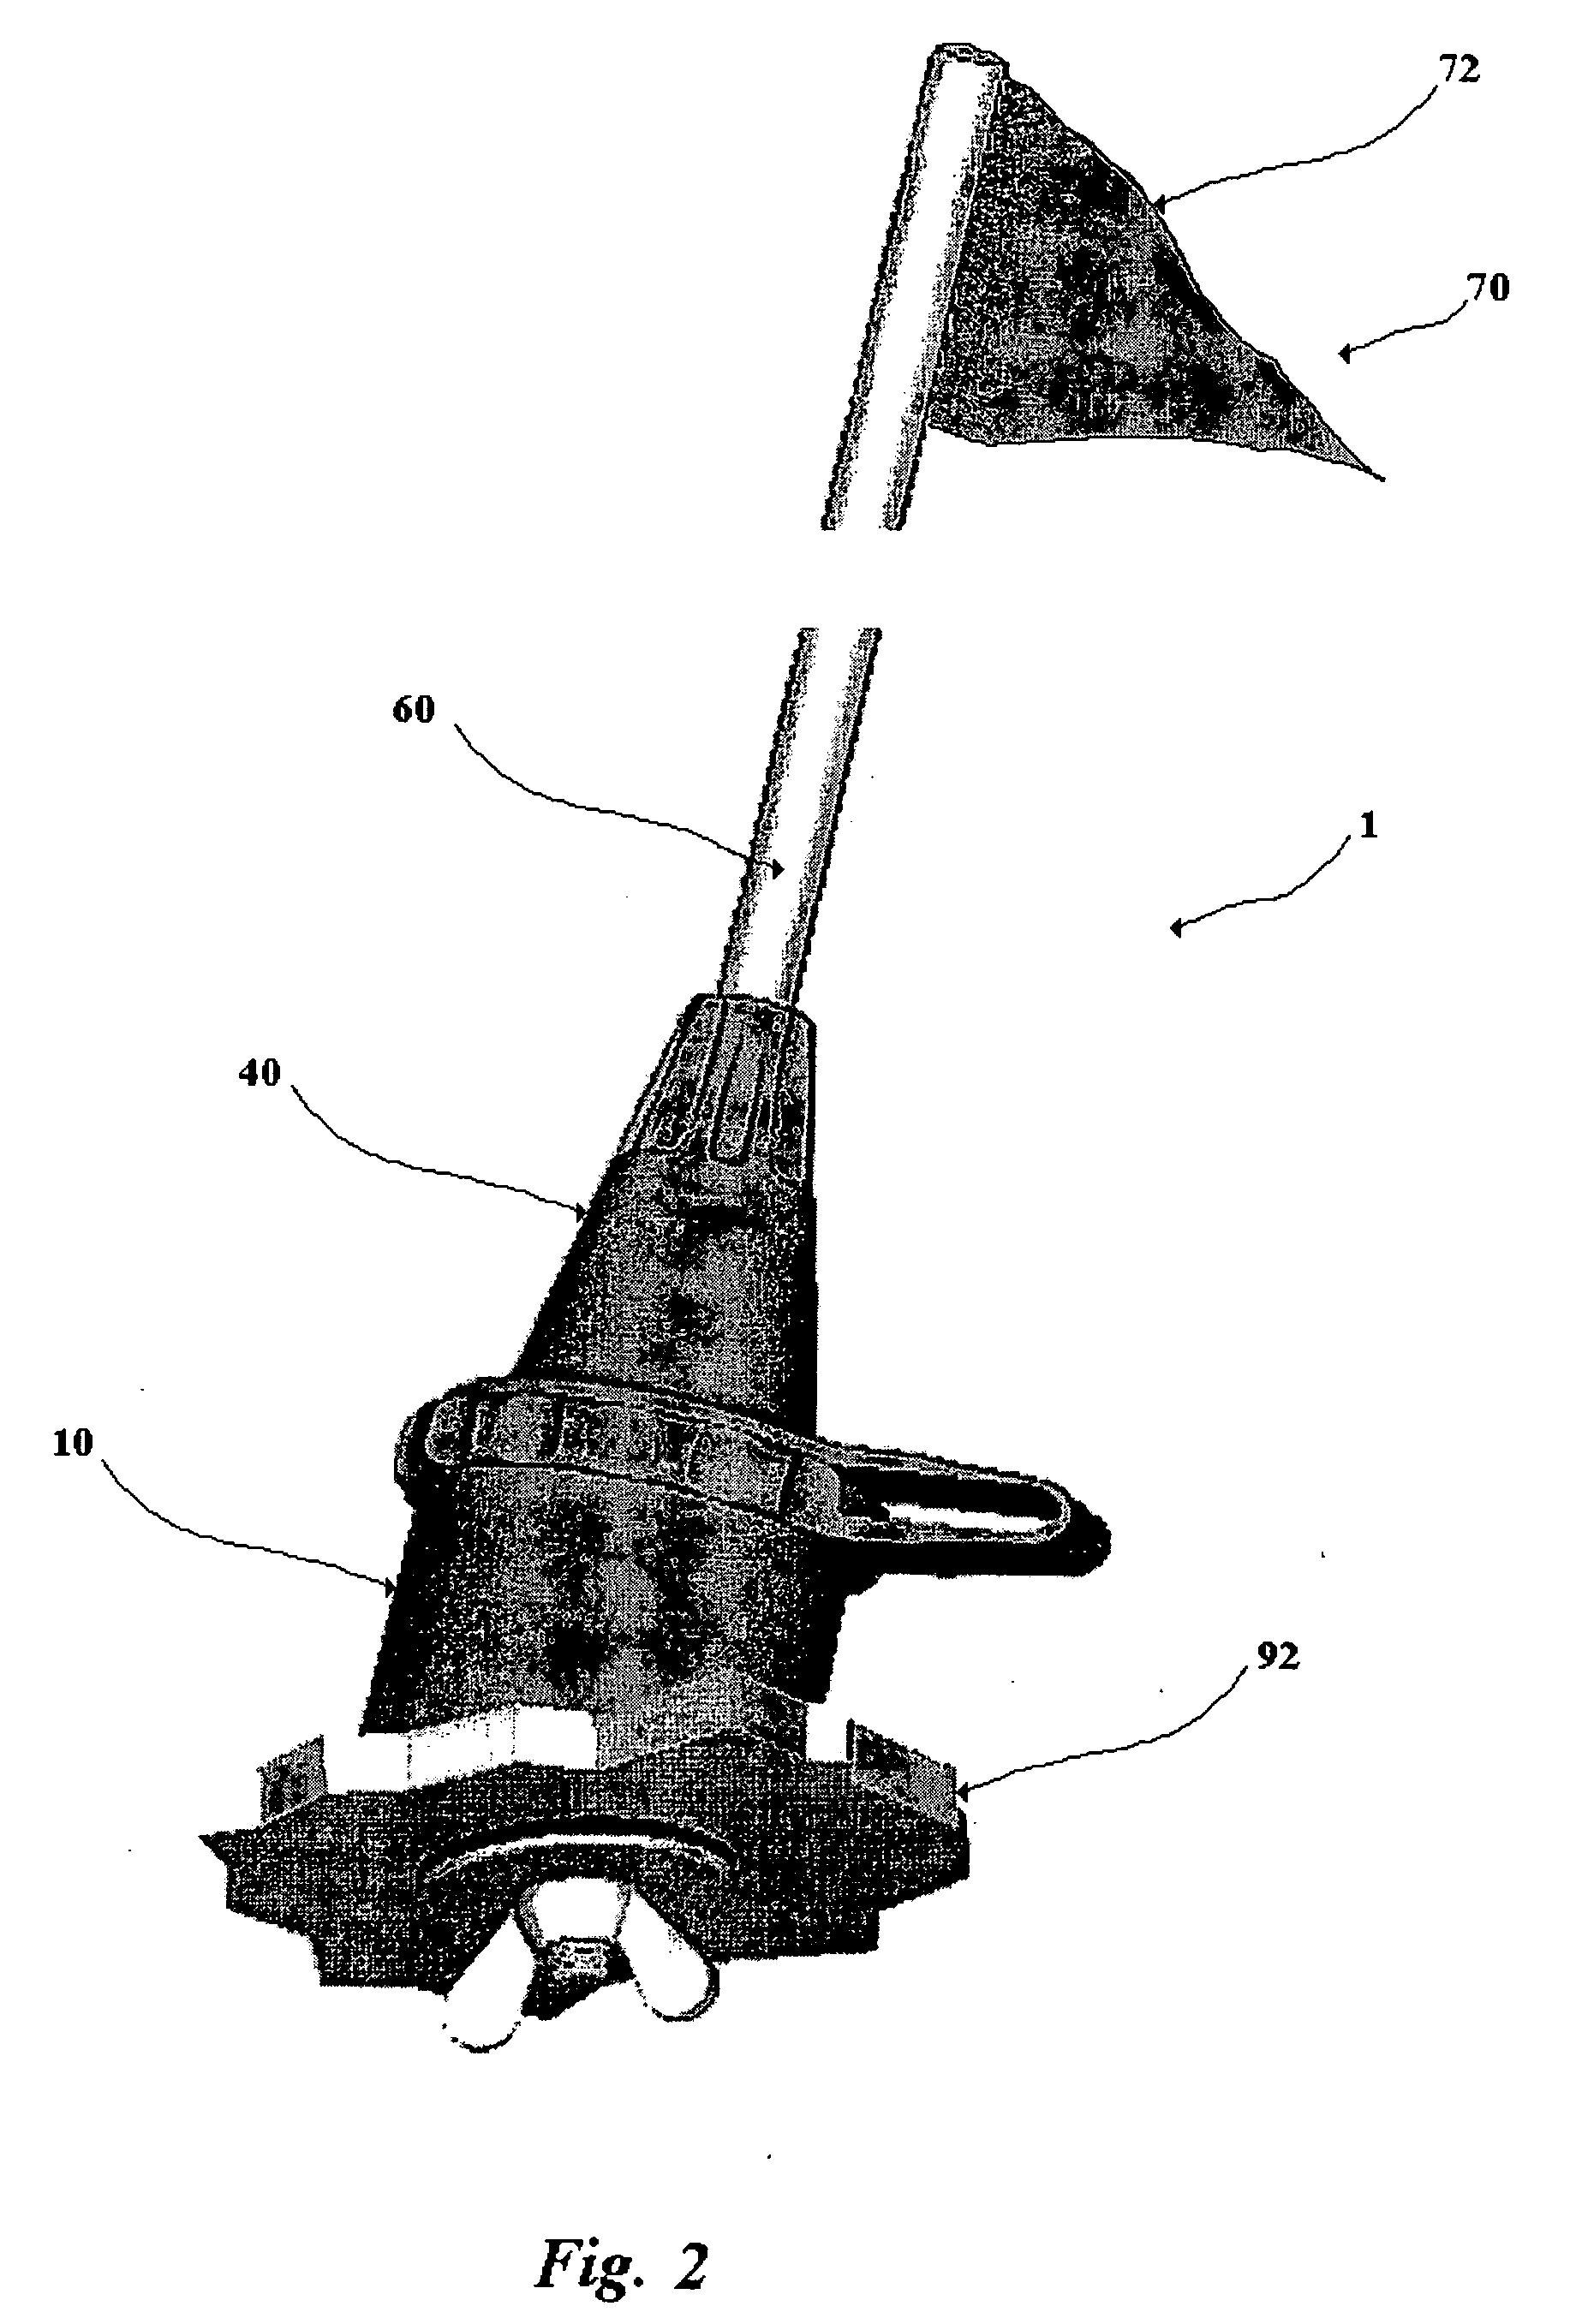 Safety signaling apparatus for watercraft